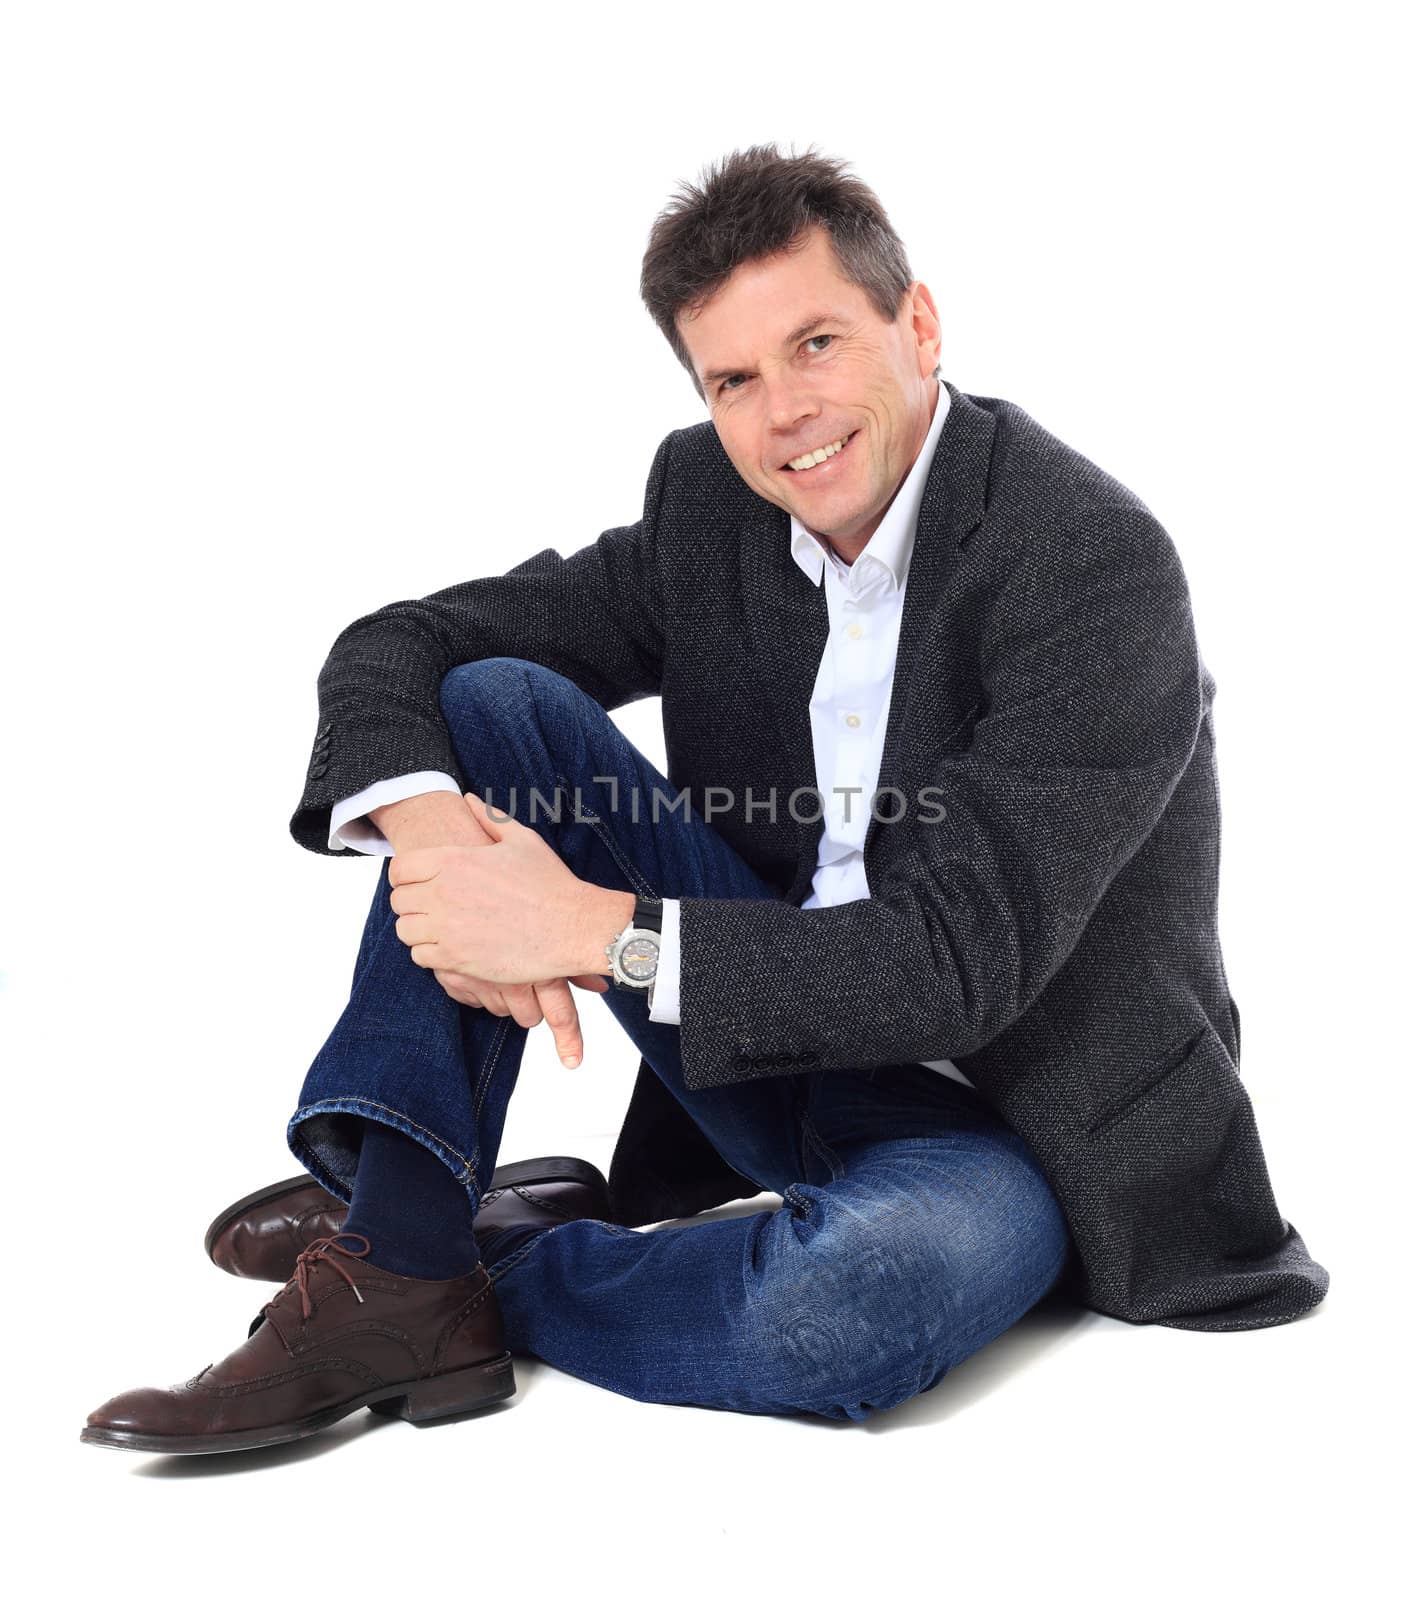 Attractive middle-aged man. All on white background.